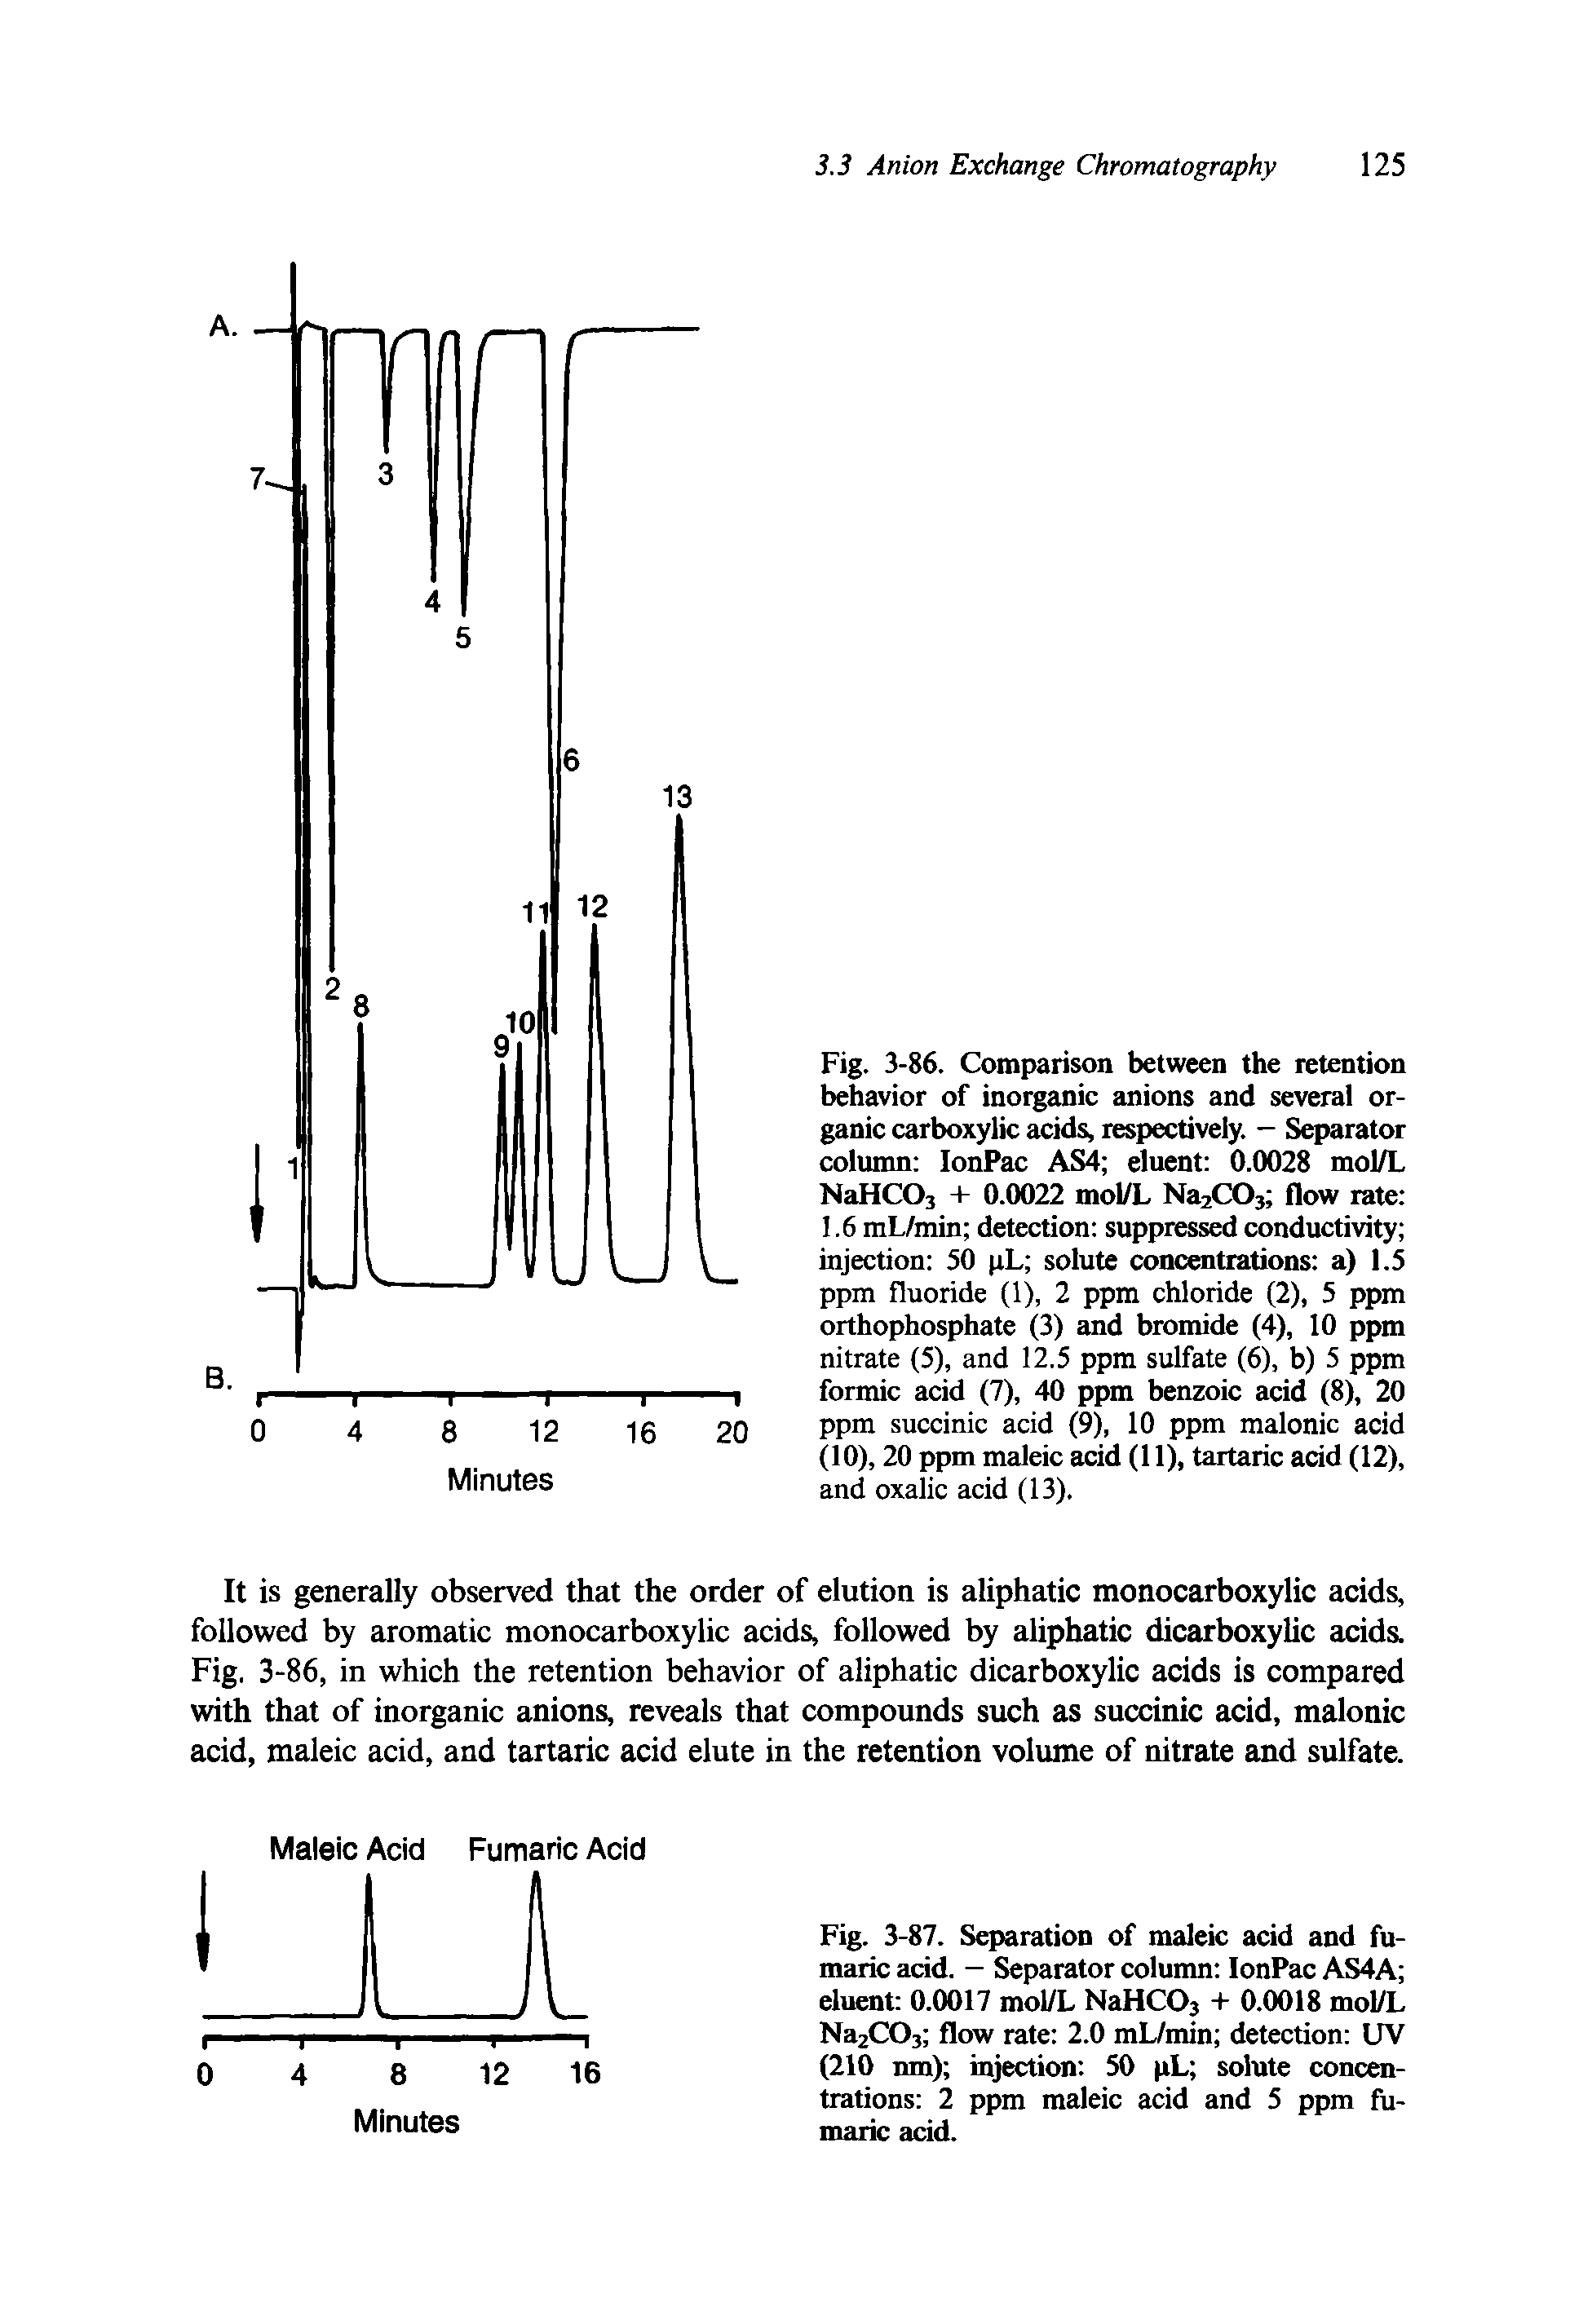 Fig. 3-86. Comparison between the retention behavior of inorganic anions and several organic carboxylic acids, respectively. - Separator column IonPac AS4 eluent 0.0028 mol/L NaHC03 + 0.0022 mol/L Na2C03 flow rate 1.6 mL/min detection suppressed conductivity injection 50 pL solute concentrations a) 1.5 ppm fluoride (1), 2 ppm chloride (2), 5 ppm orthophosphate (3) and bromide (4), 10 ppm nitrate (5), and 12.5 ppm sulfate (6), b) 5 ppm formic acid (7), 40 ppm benzoic acid (8), 20 ppm succinic acid (9), 10 ppm malonic acid (10), 20 ppm maleic acid (11), tartaric acid (12), and oxalic acid (13).